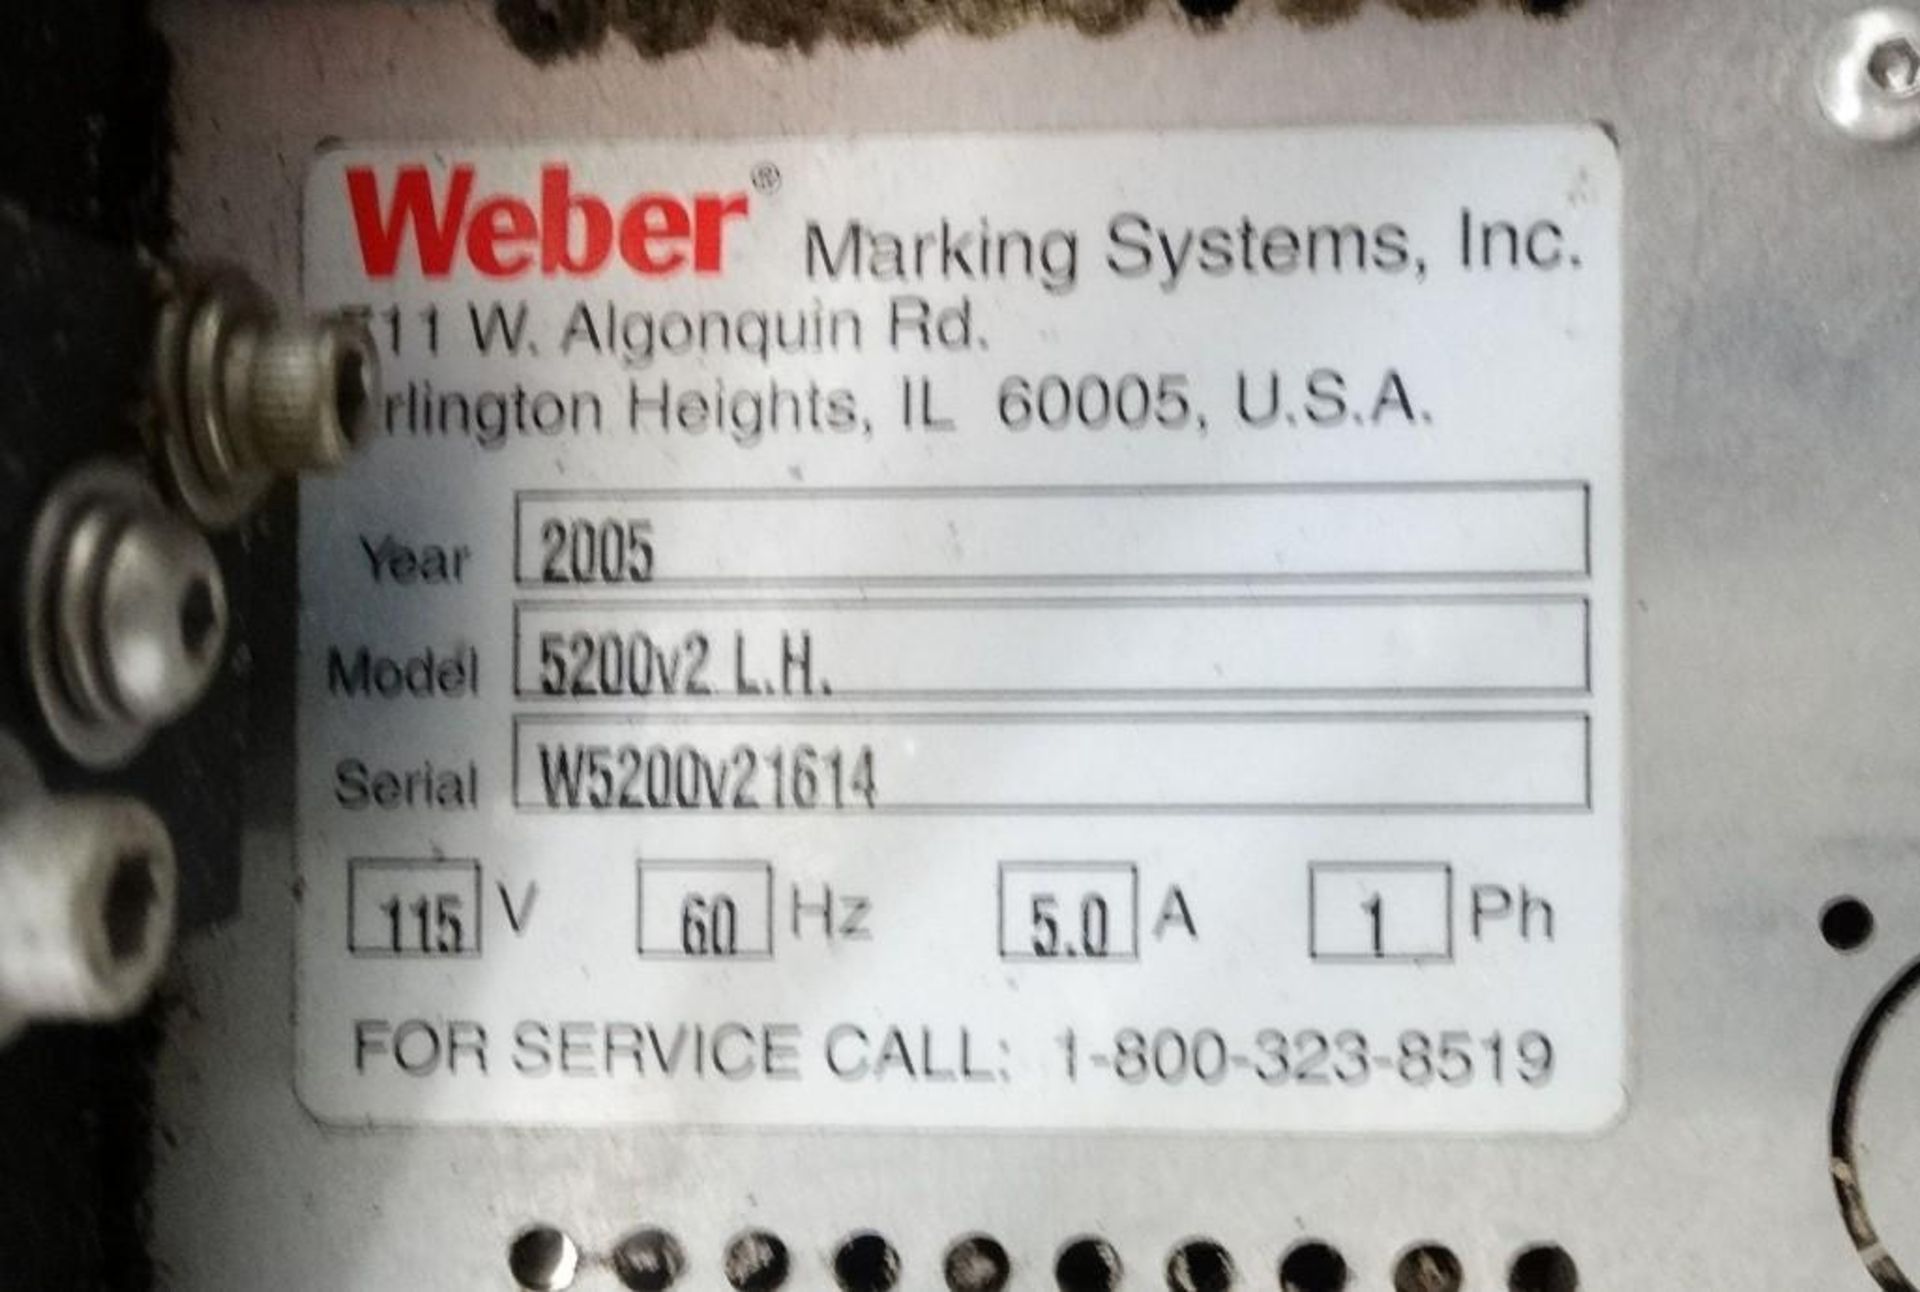 Weber 5200 Print Apply Labeler with Sato Printer - Image 15 of 15